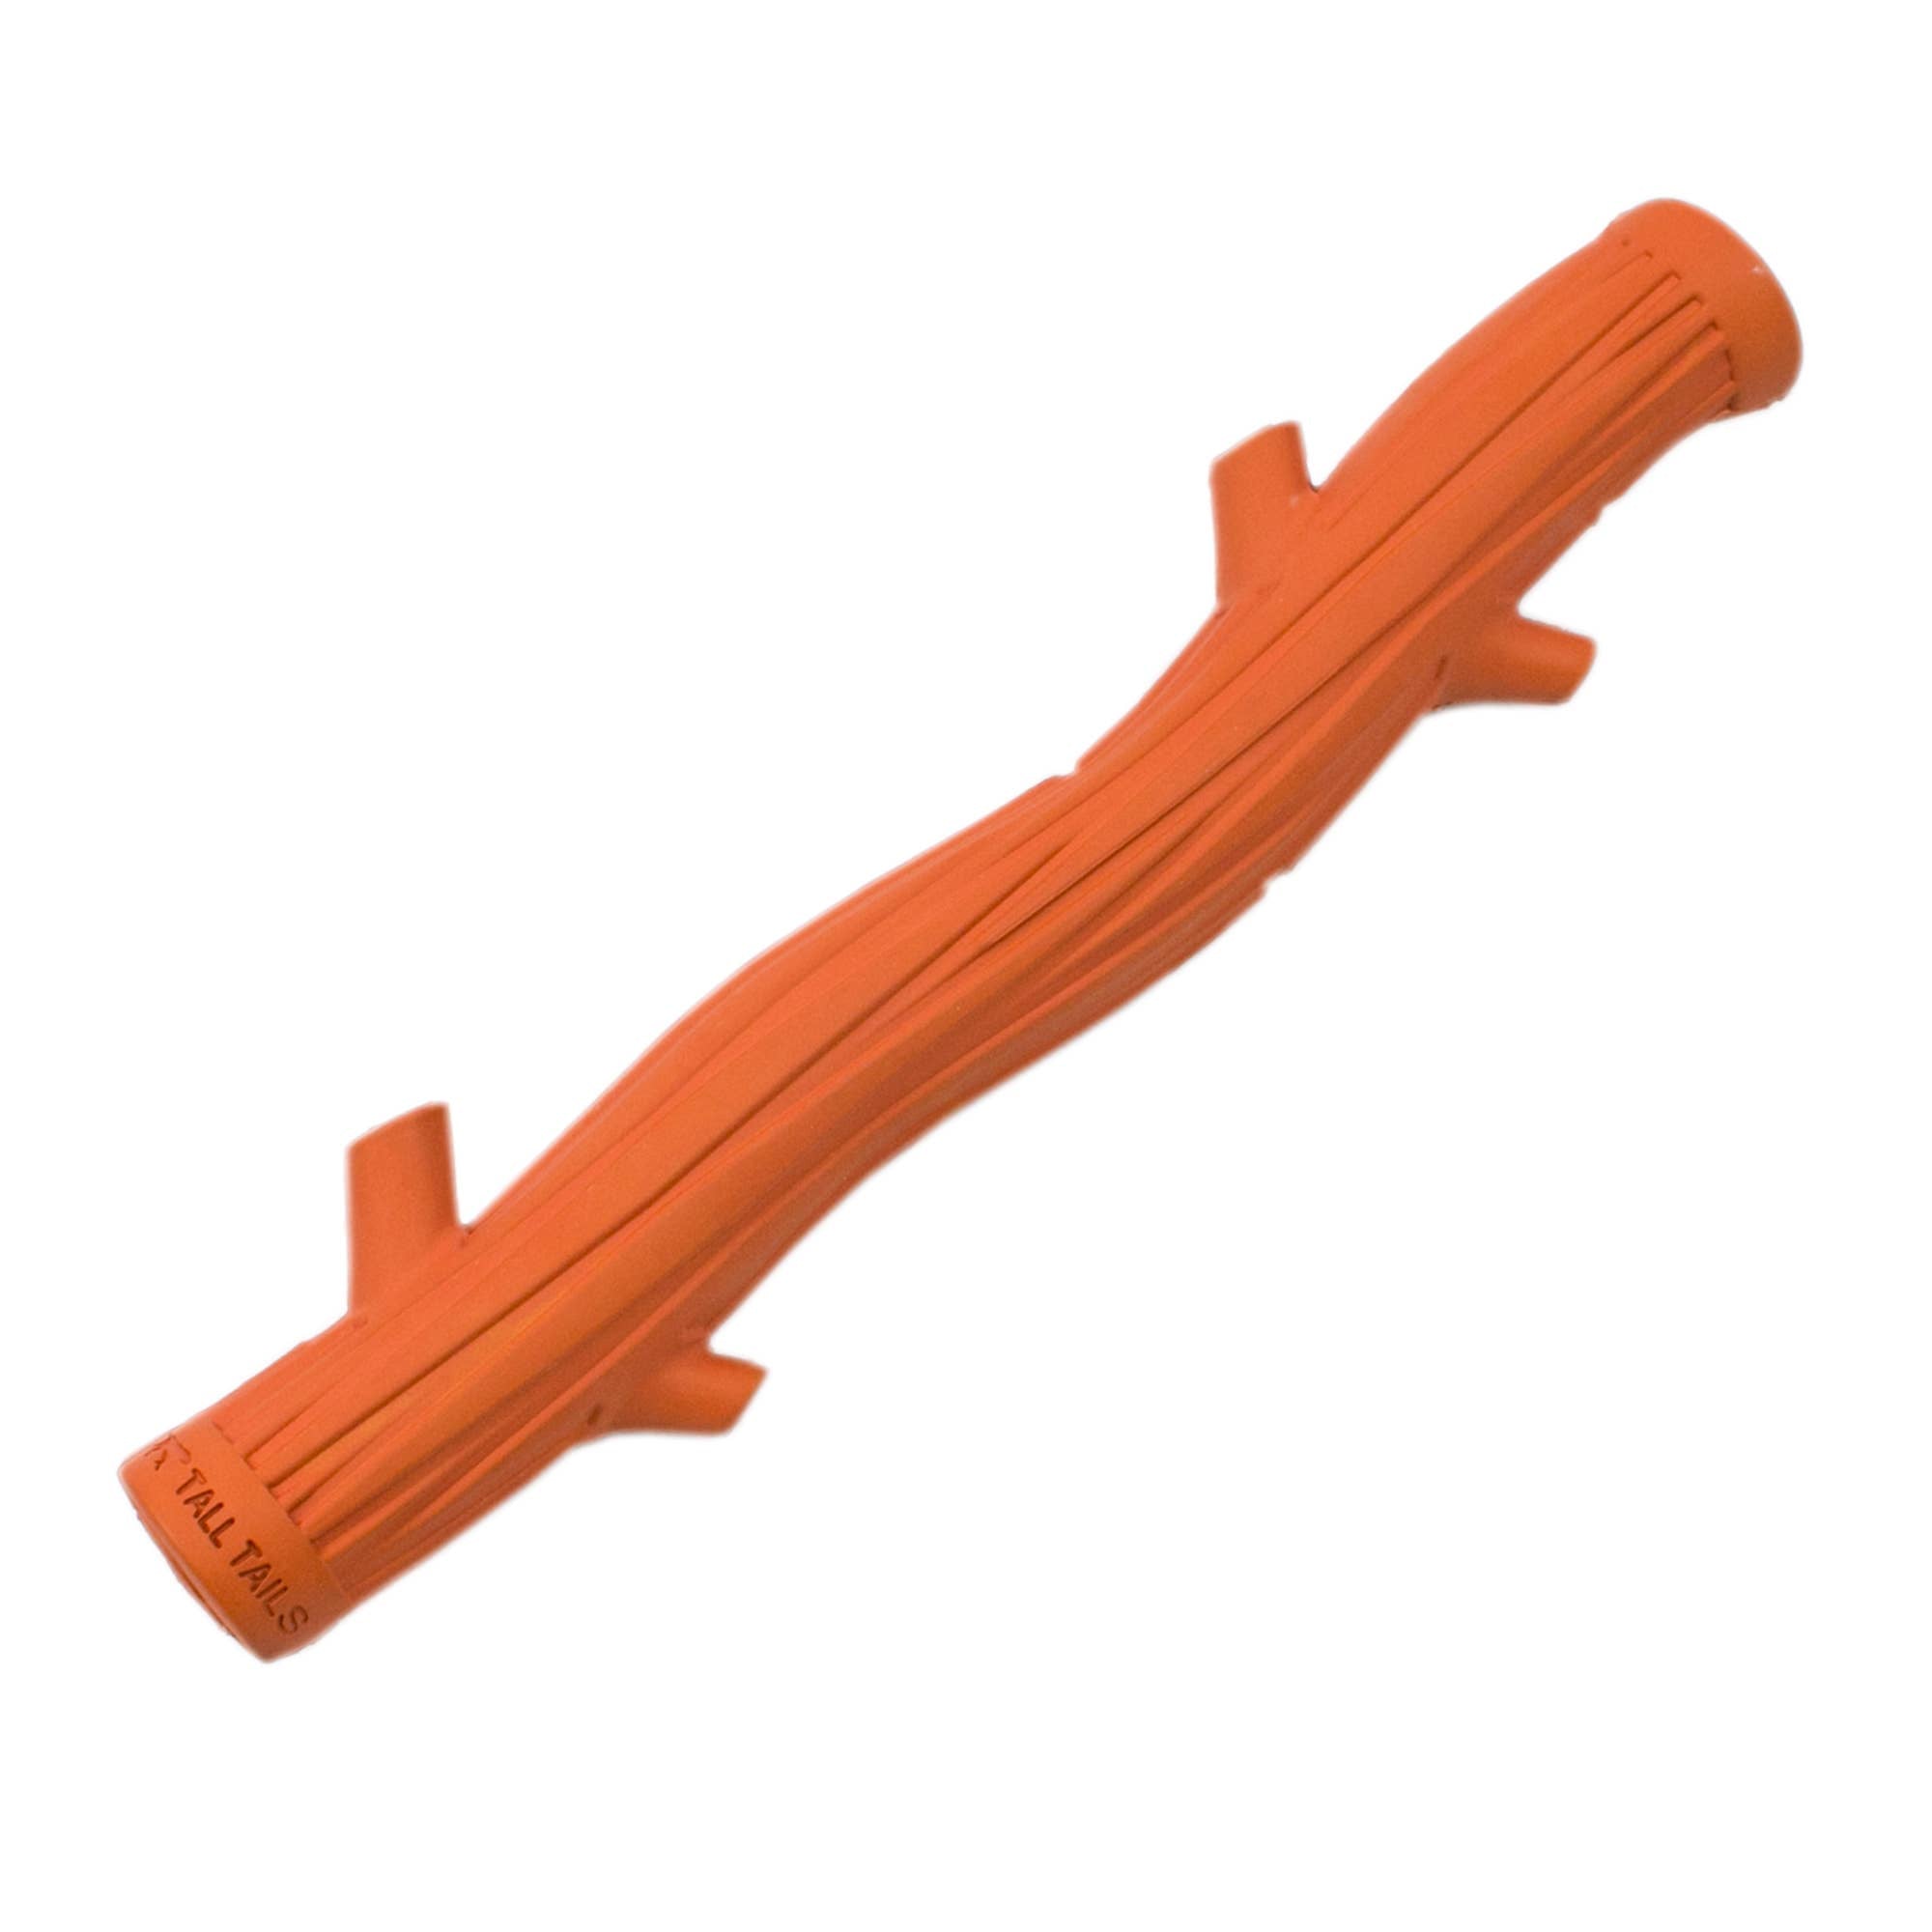 Tall Tails - Natural Rubber Stick Toy